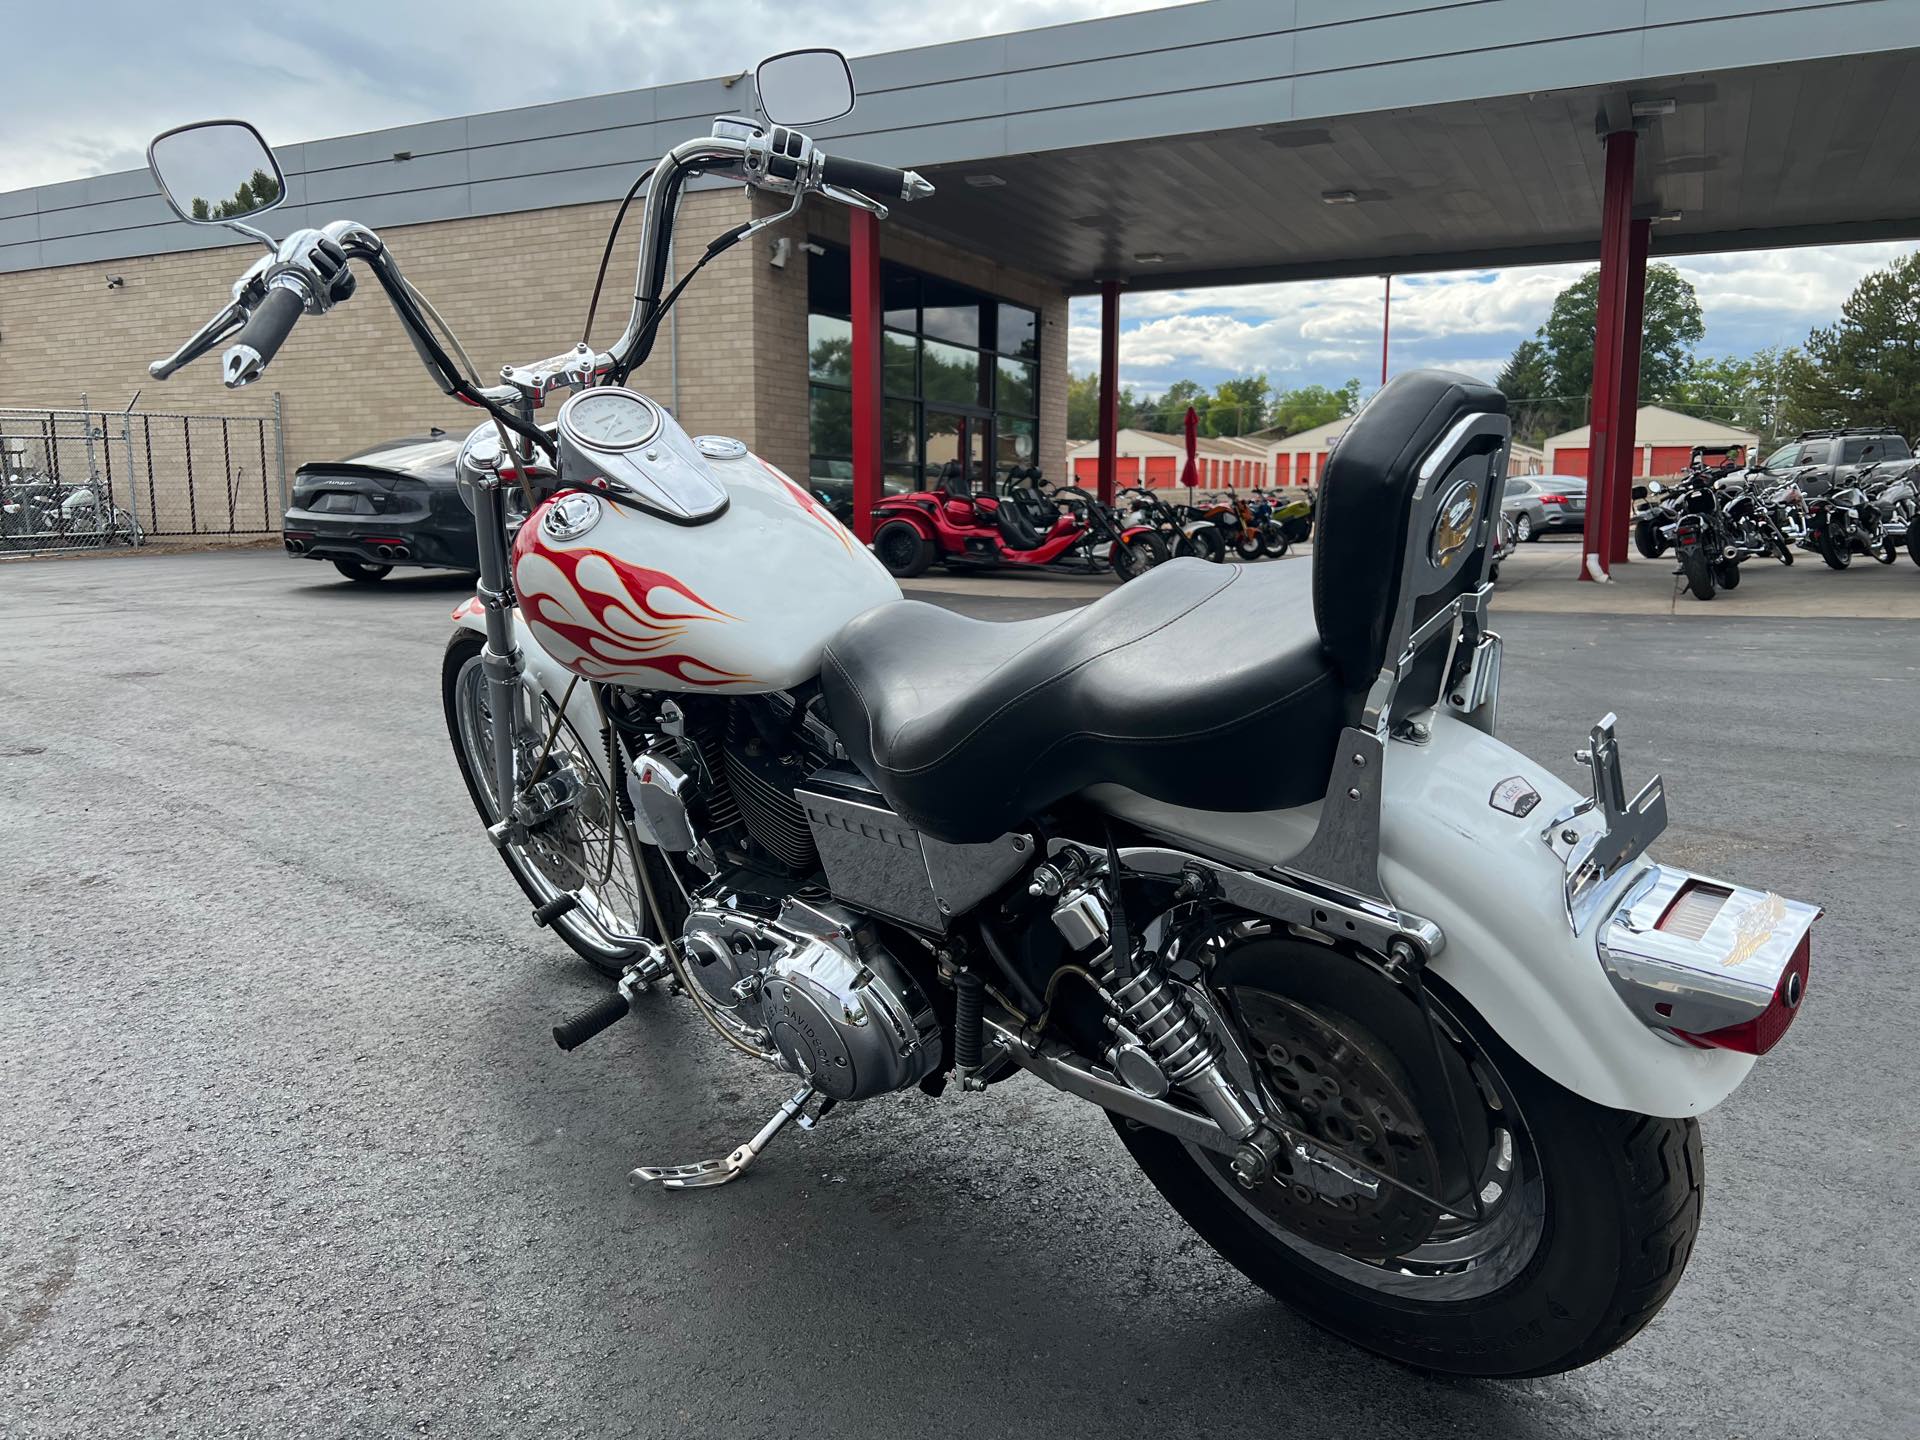 1996 HARLEY DAVIDSON XL1200C at Aces Motorcycles - Fort Collins